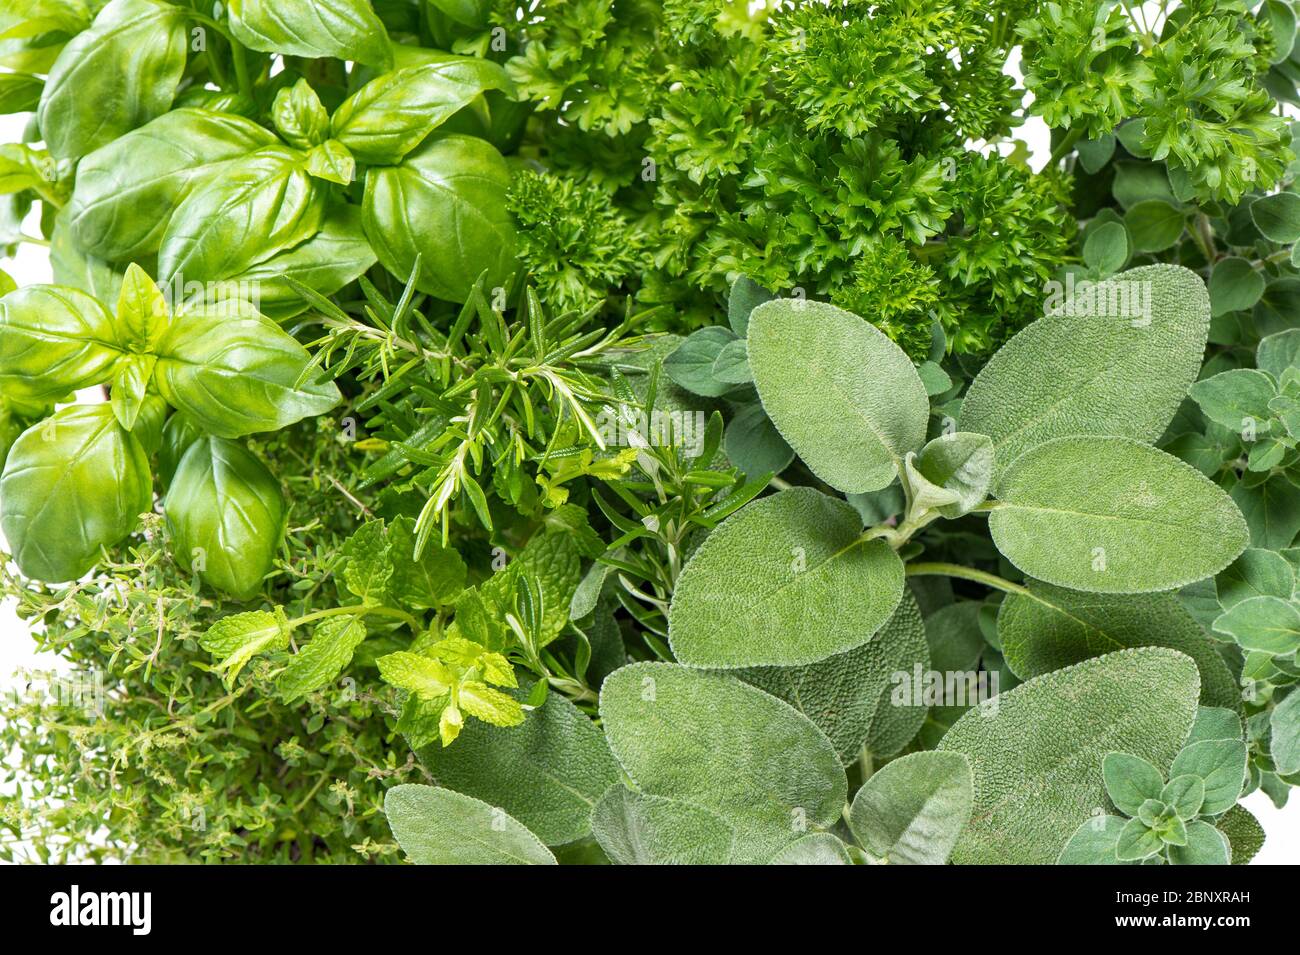 Basil, rosemary, thyme, mint. Kitchen herbs. Healthy food ingredients Stock Photo